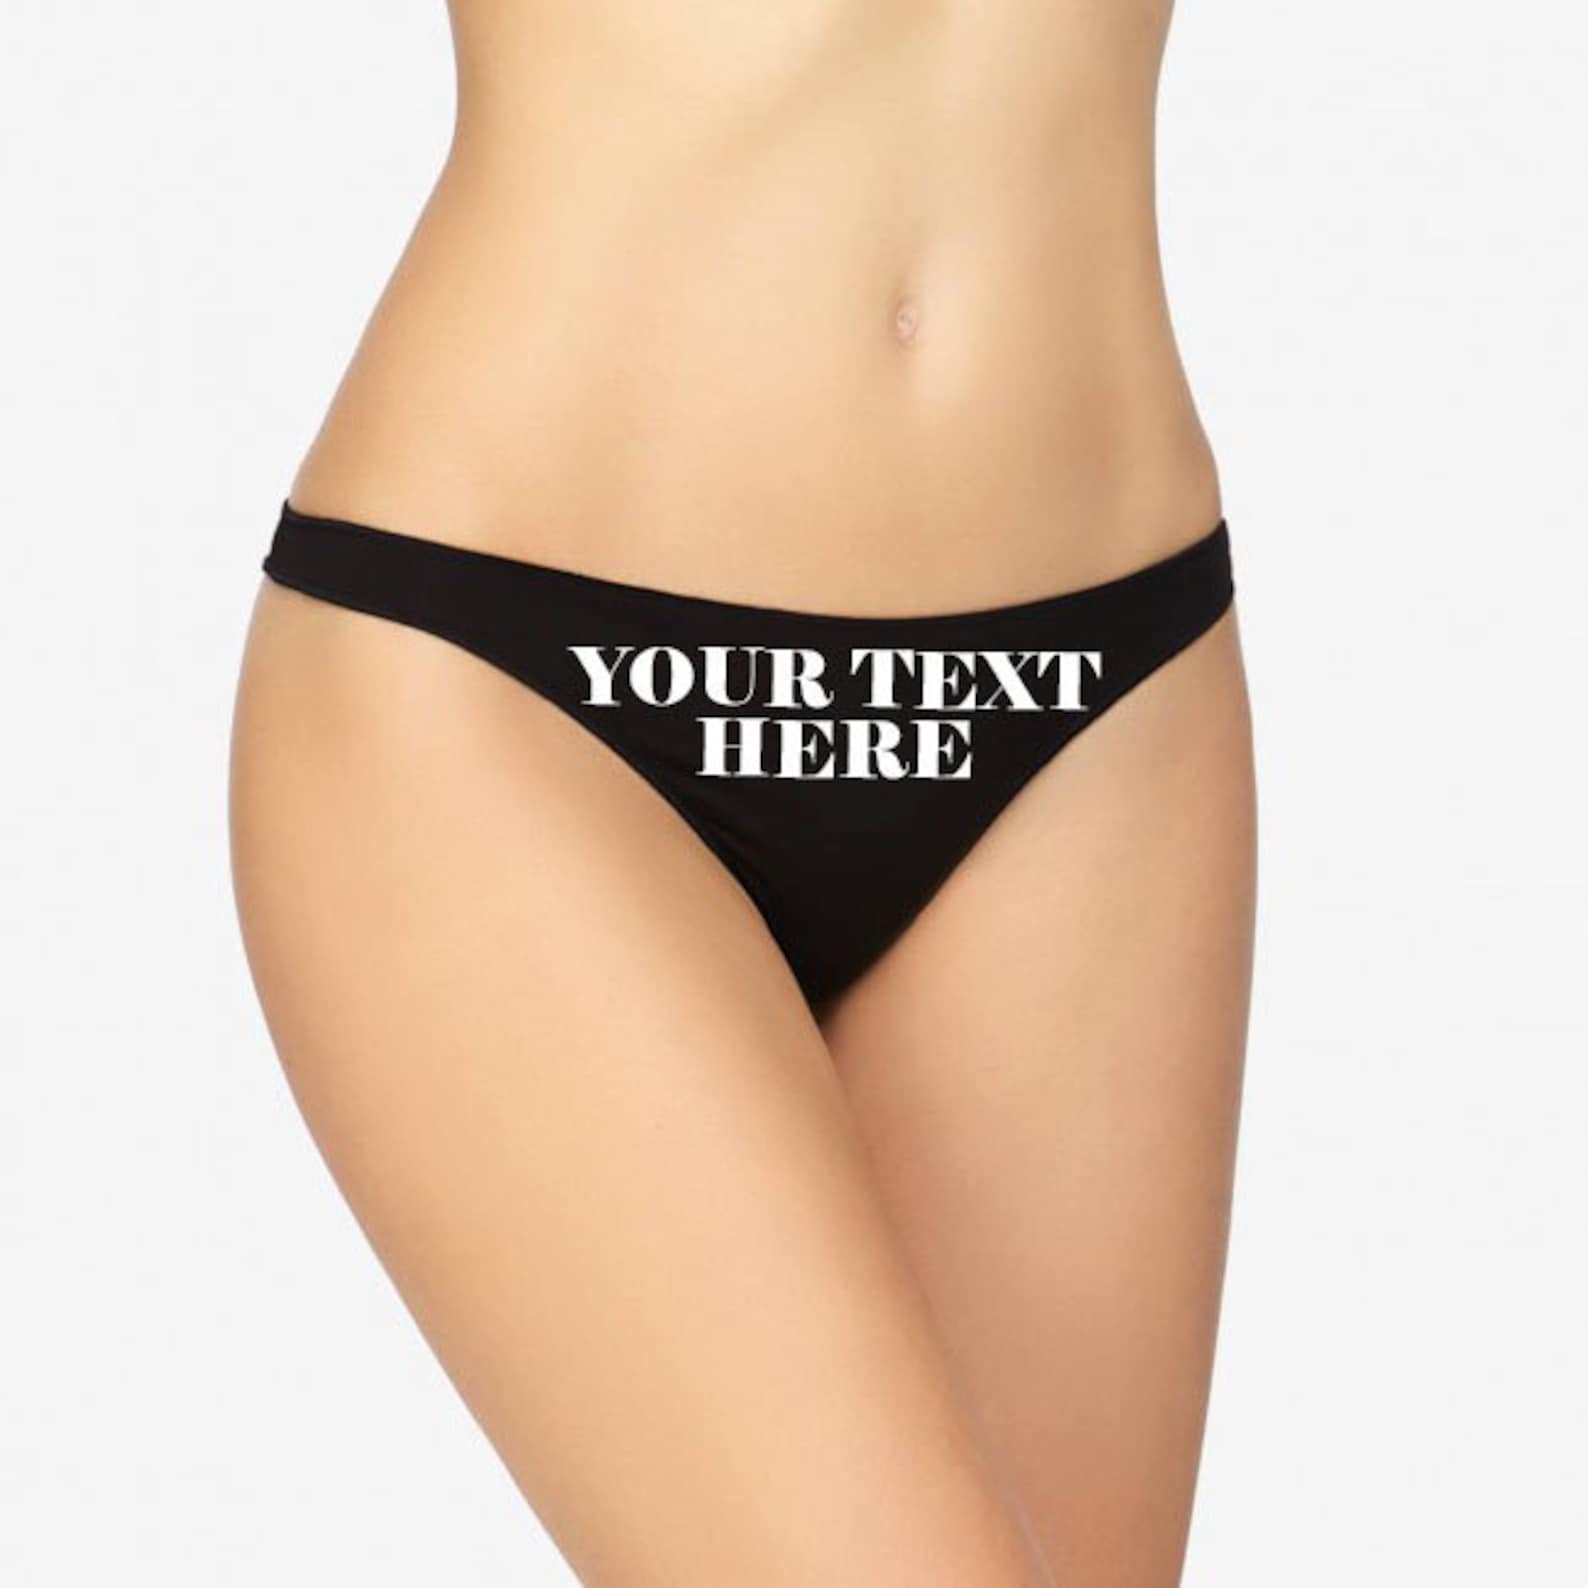 Personalized Women's Thong: Customizable With Your Own Words